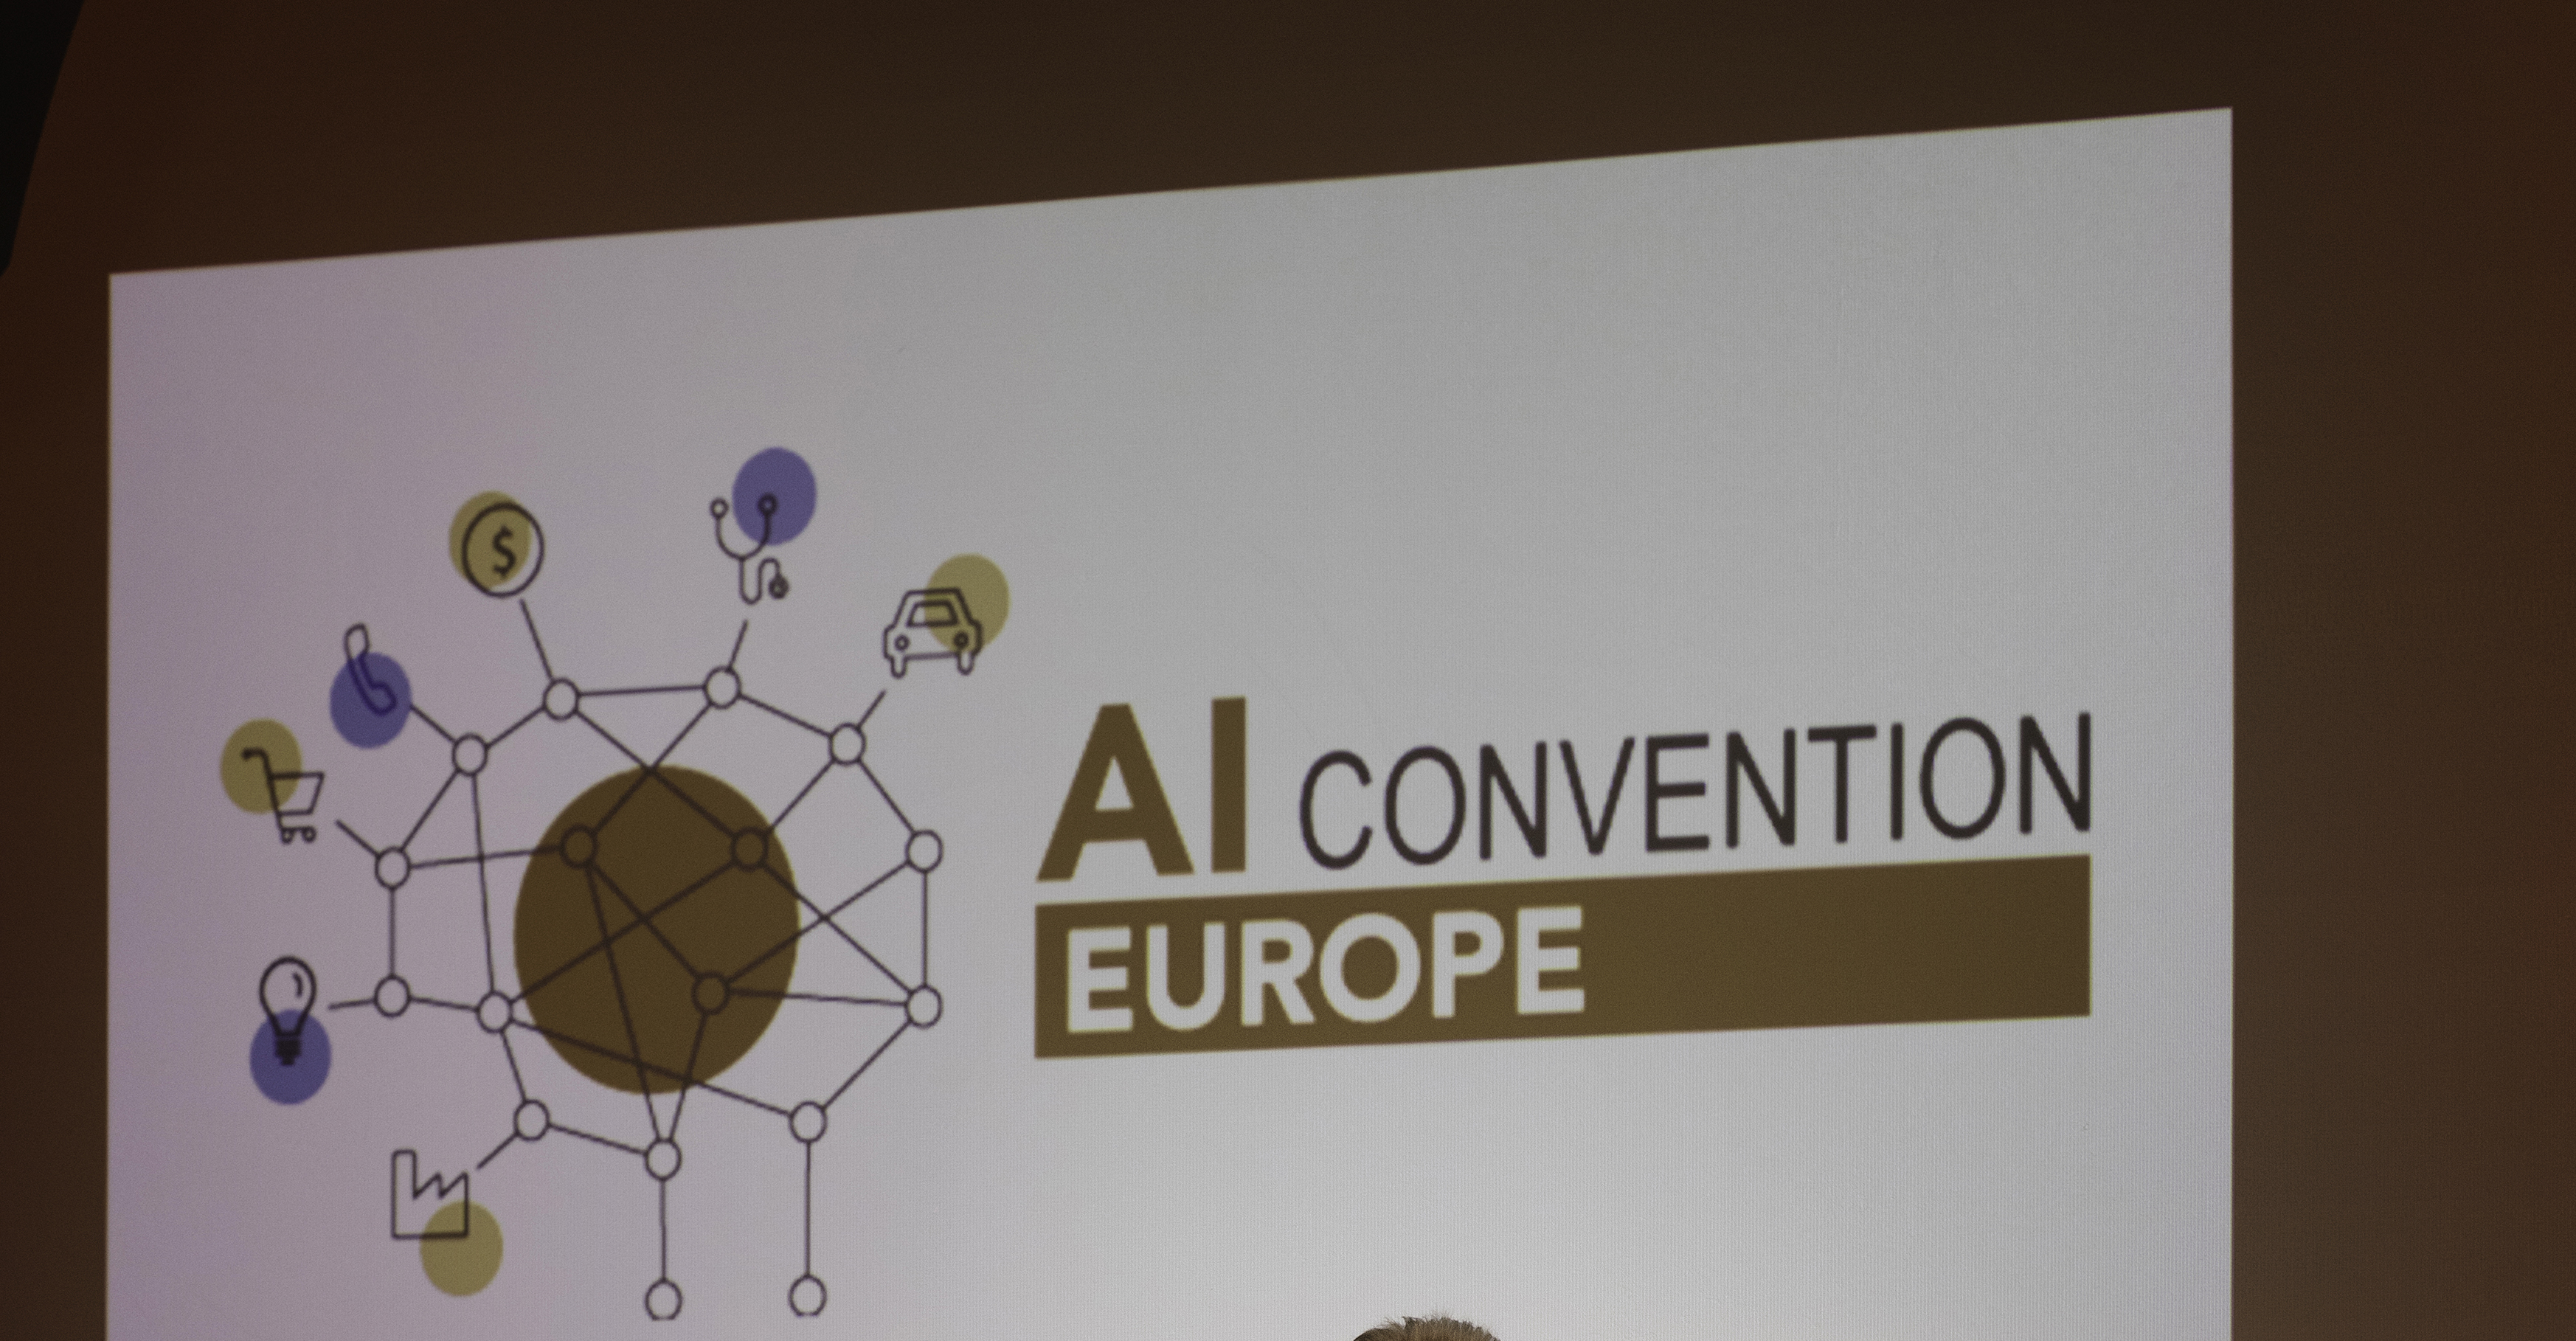 KAPTAIN showcased at AI Convention Europe 2018 by Moonoia and partners